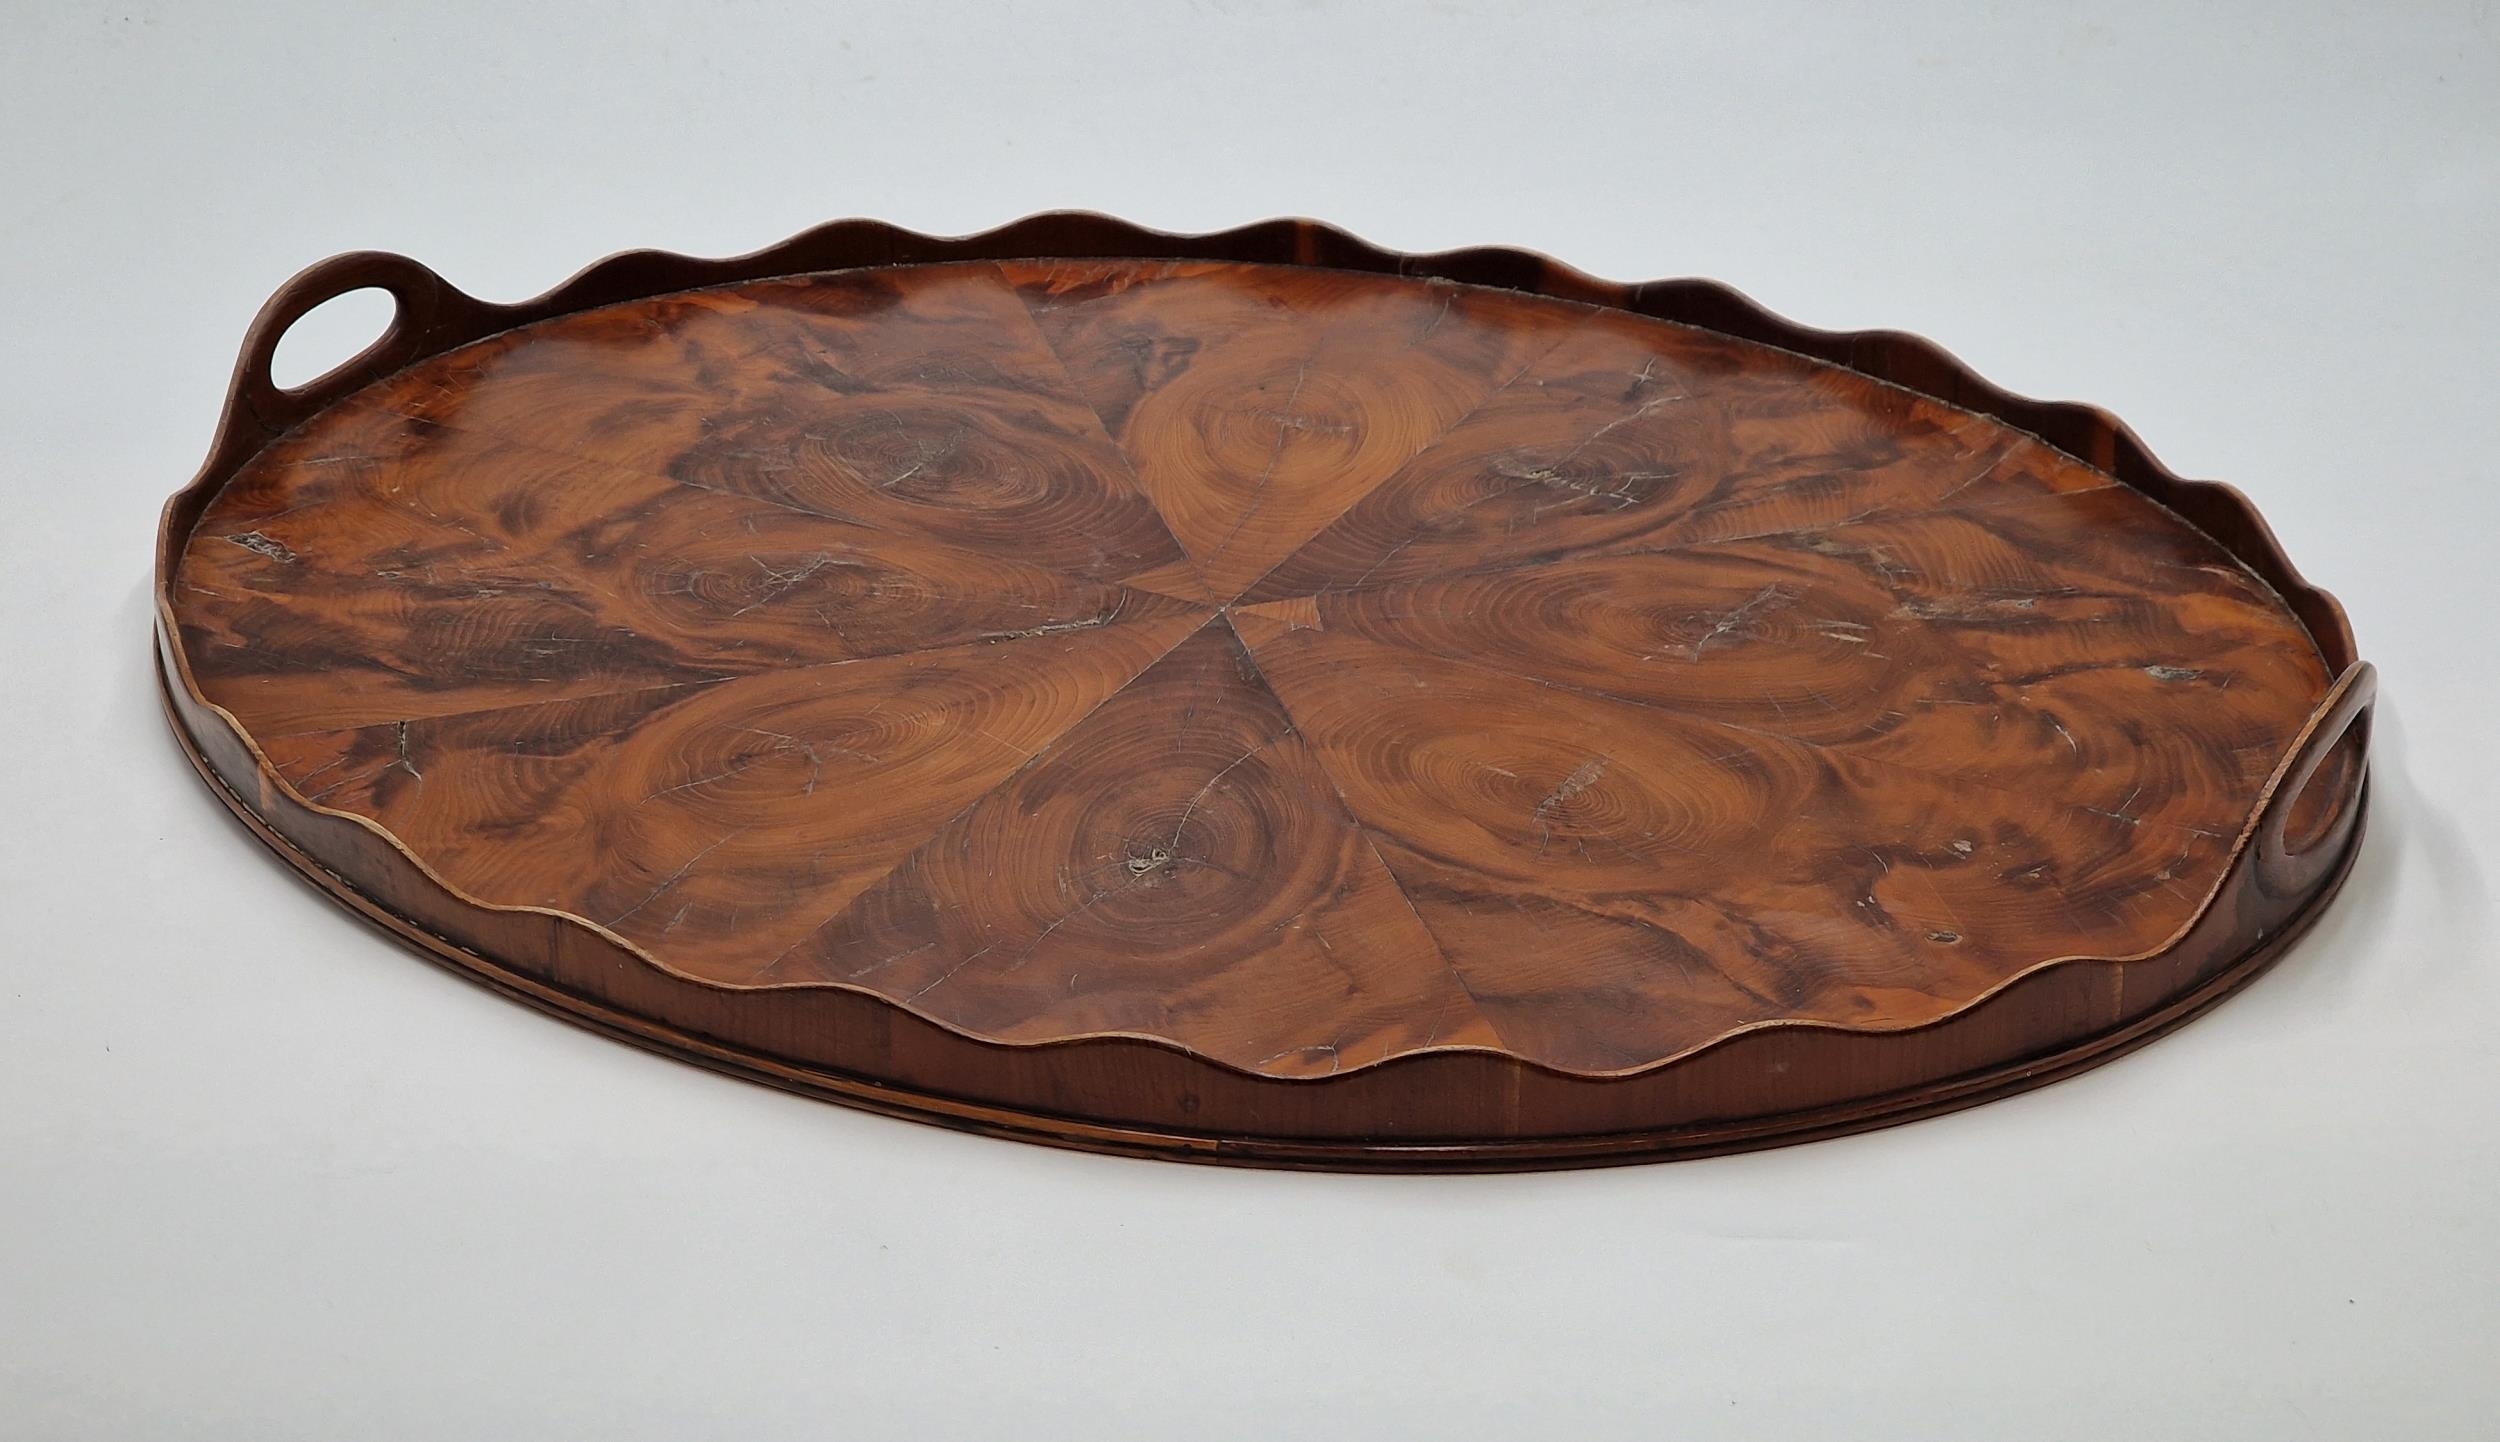 Good quality 19th century oyster veneered laburnum wood oval butlers tray with shaped gallery and